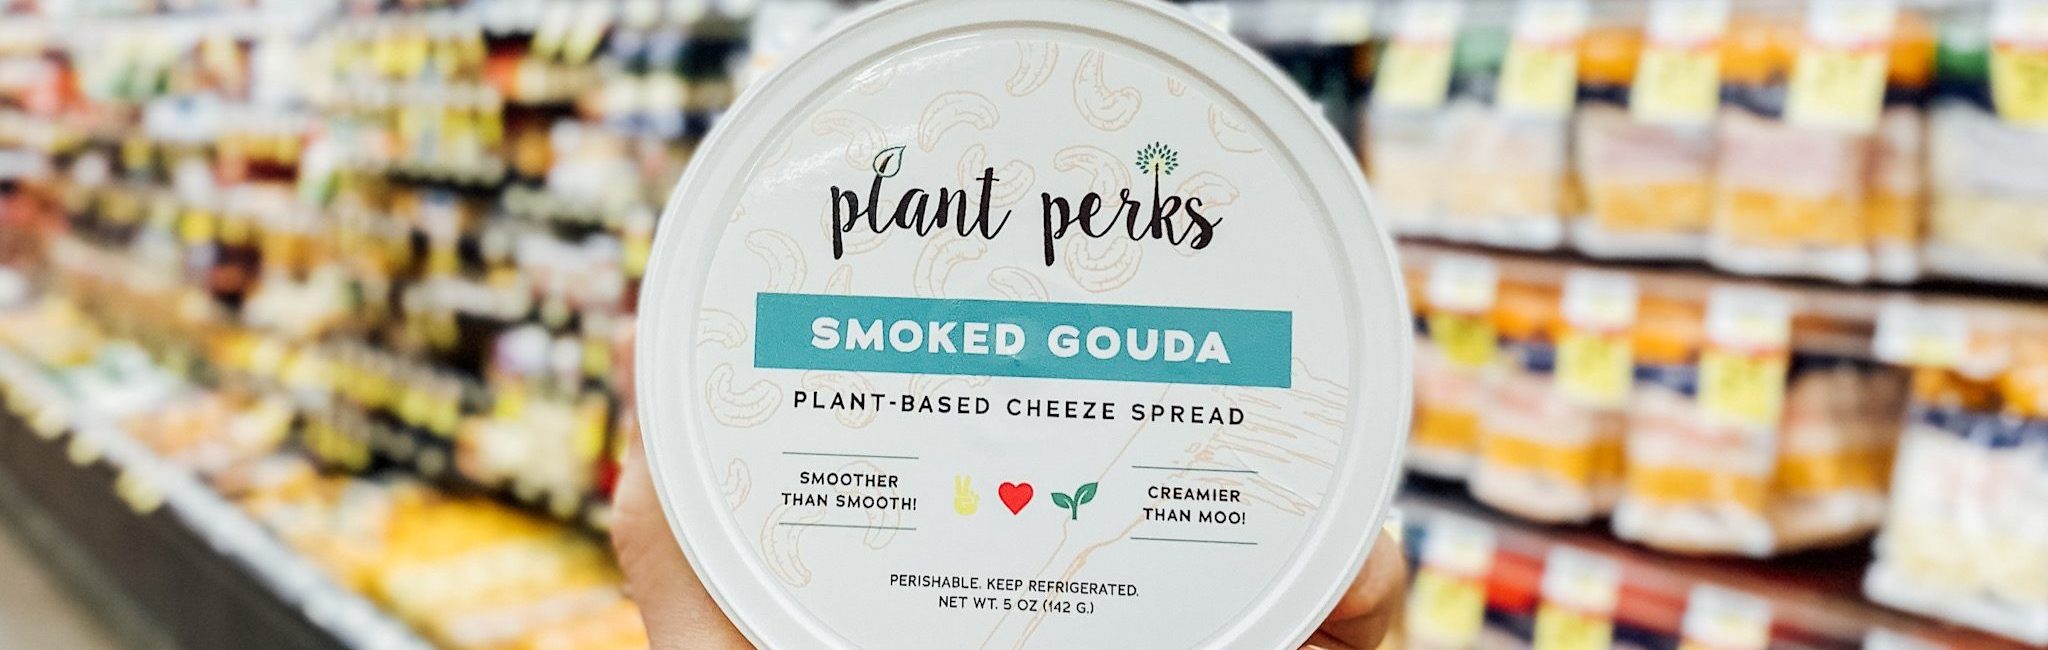 Plant Perks Smoked Gouda Vegan Cheese container in a grocery store